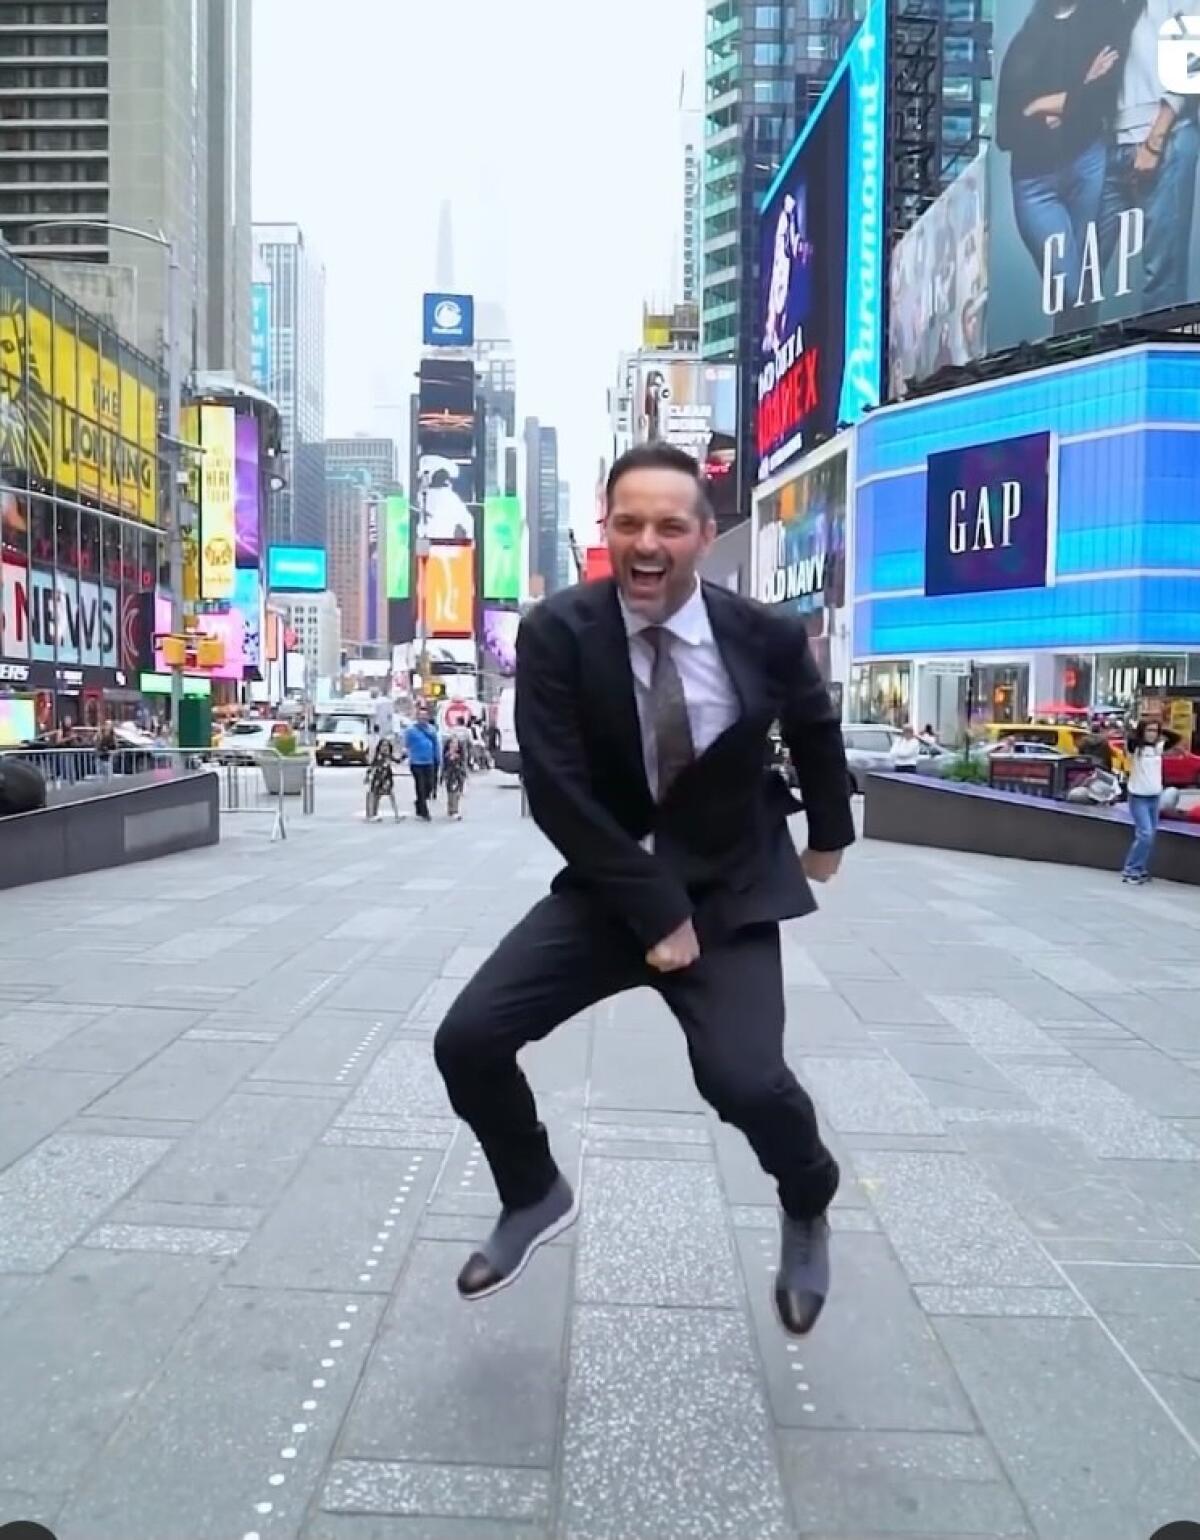 A man dances in New York's Times Square.